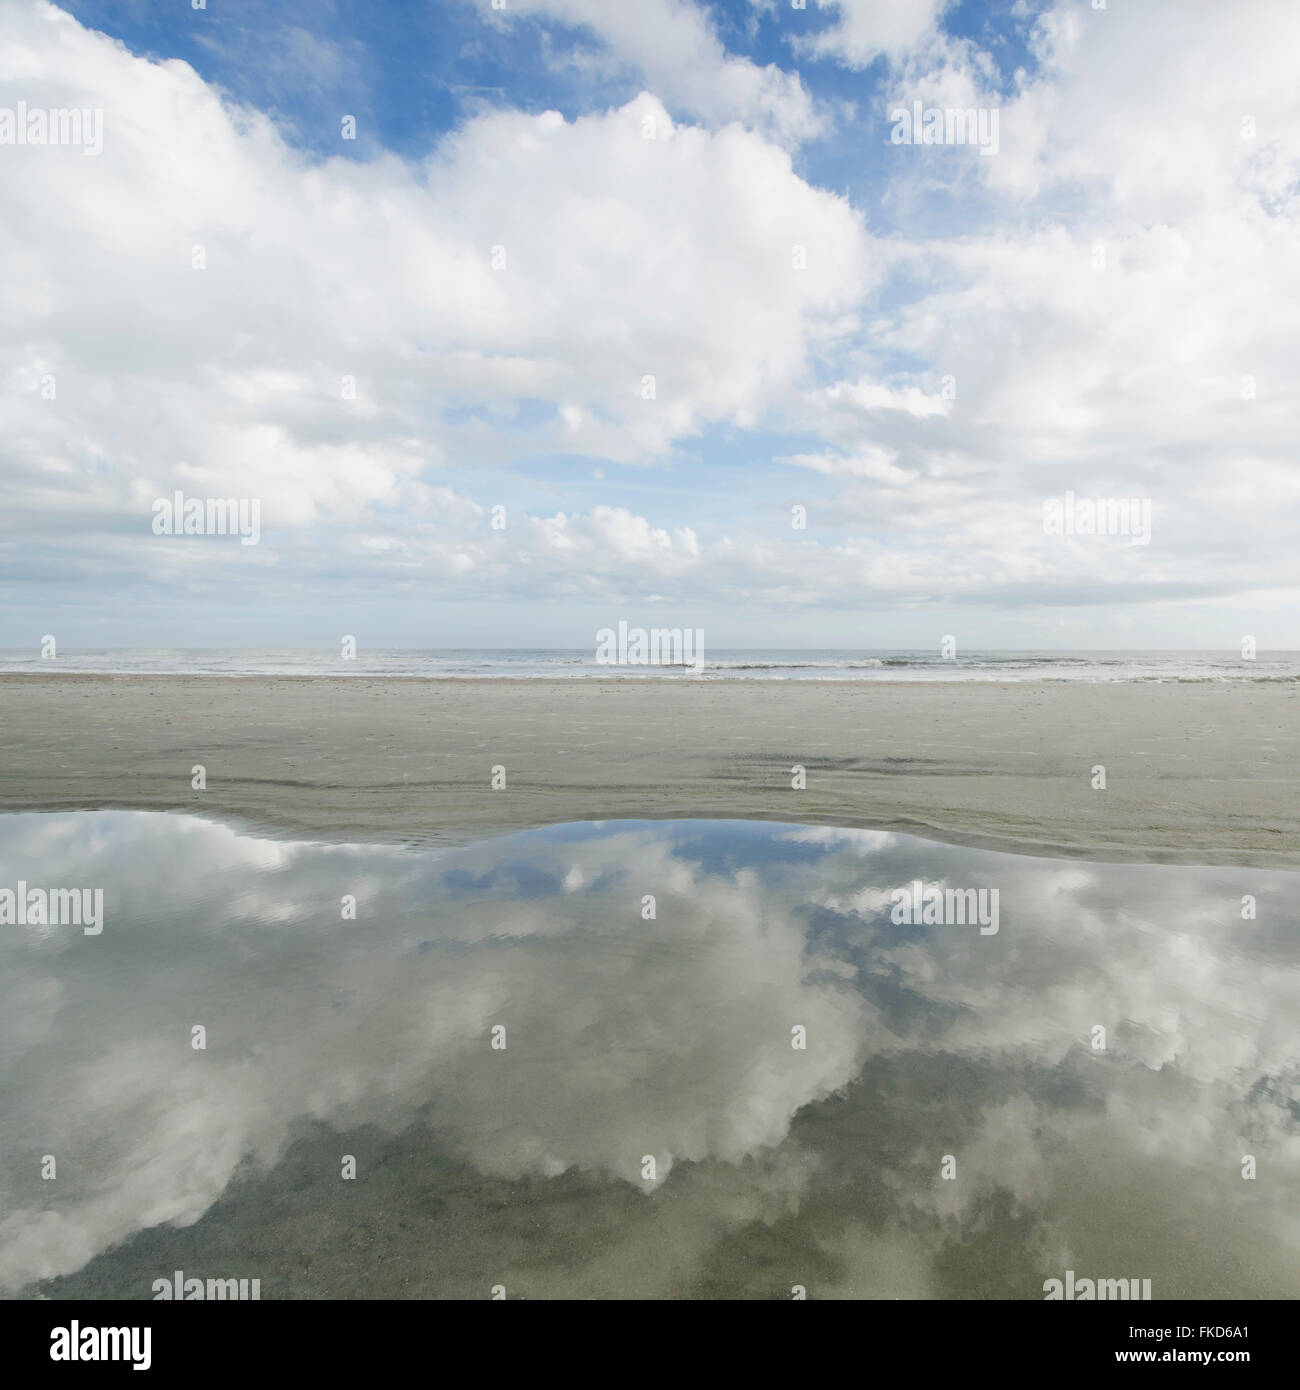 Reflection of clouds in puddle, sea in background Stock Photo